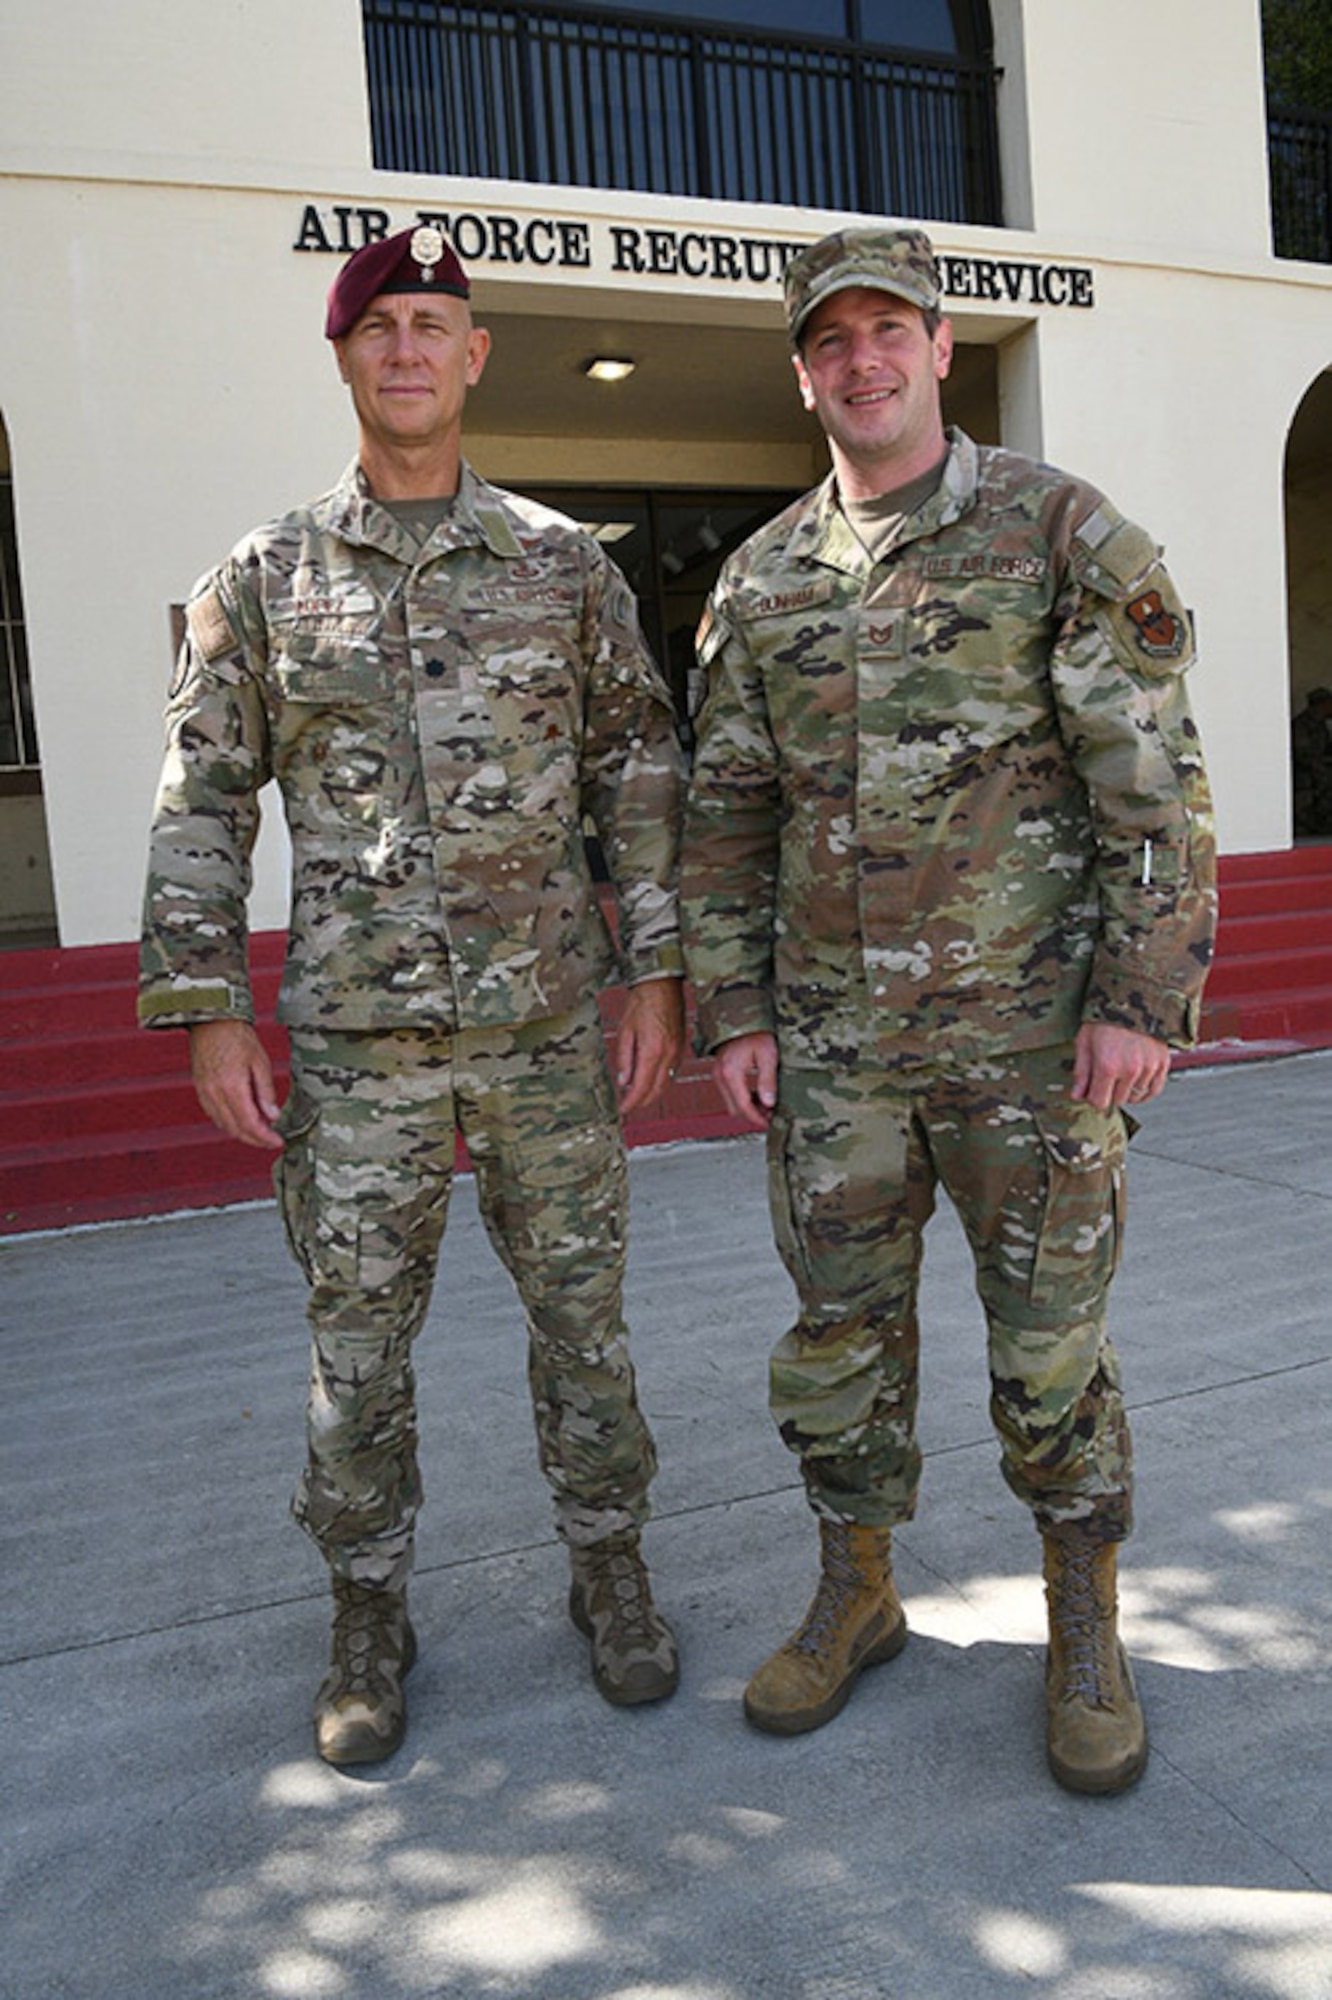 Lt. Col. Joseph Lopez and Tech. Sgt. Kevin Dunham, two of seven members of AFRS’s Recruiting Operations Special Warfare branch pose for a photo outside AFRS’s headquarters at Joint Base San Antonio-Randolph Aug. 4, 2022.